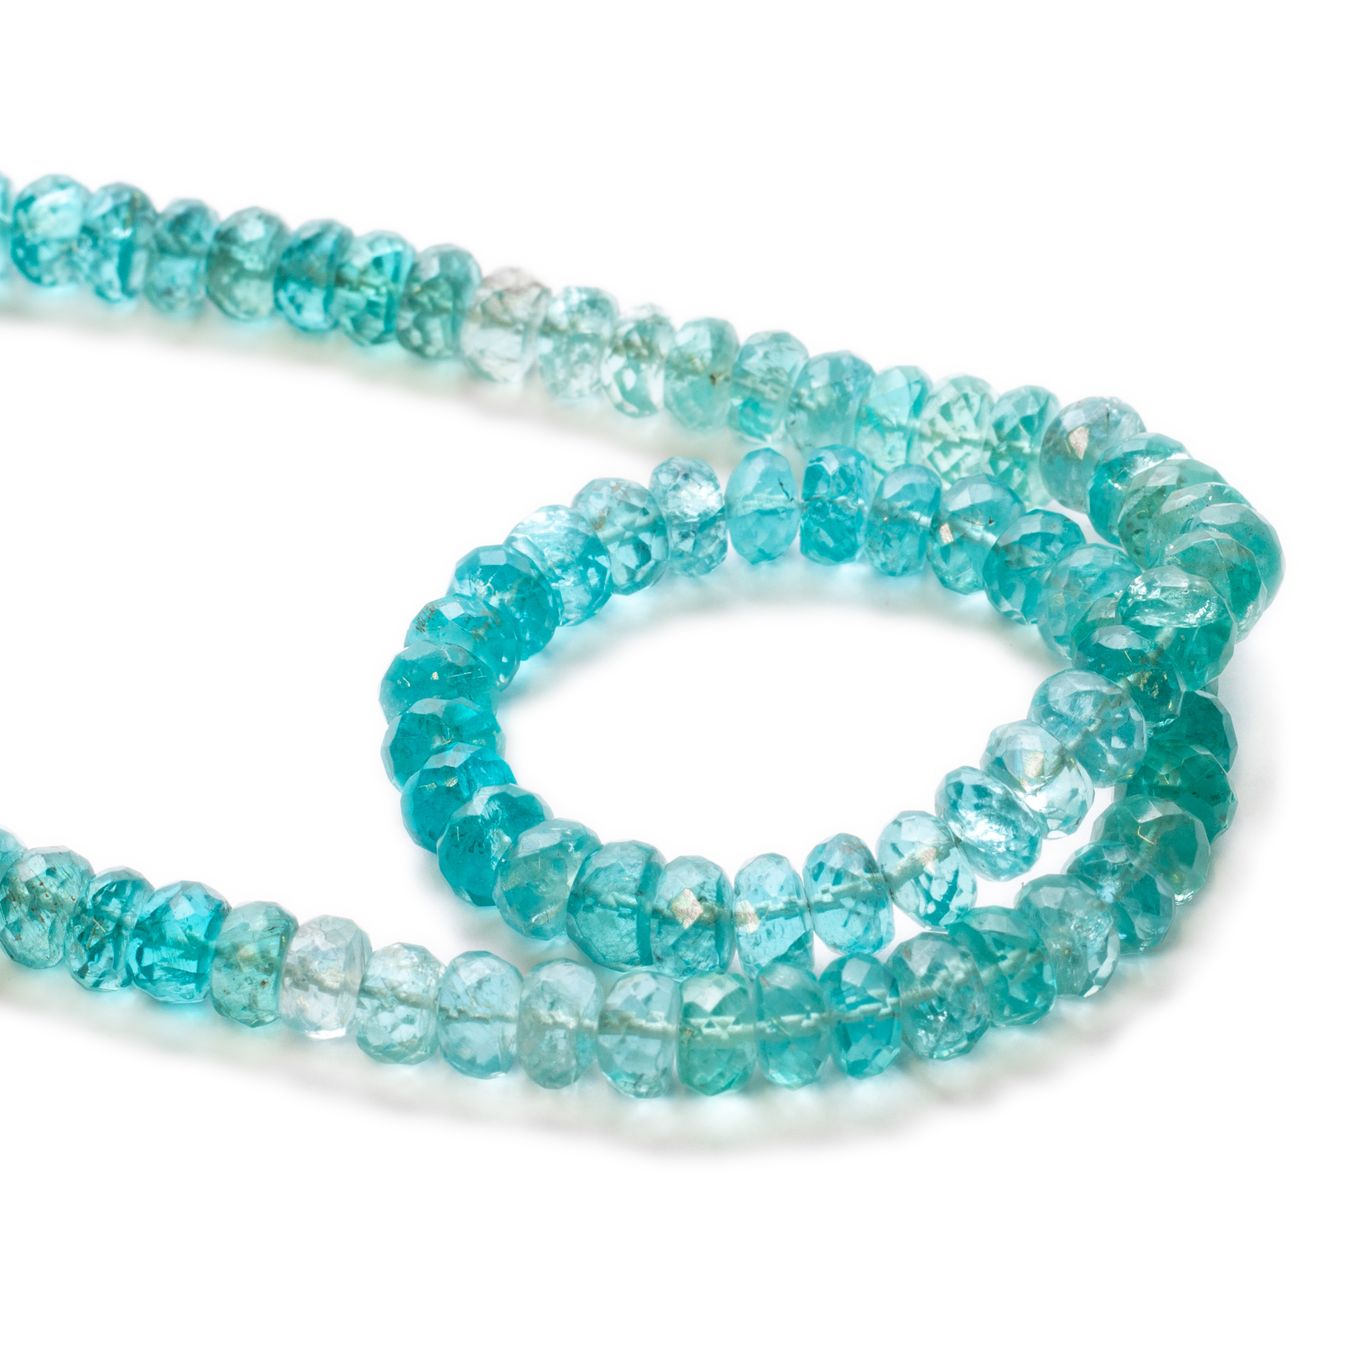 Apatite Faceted Rondelle Beads - Various sizes